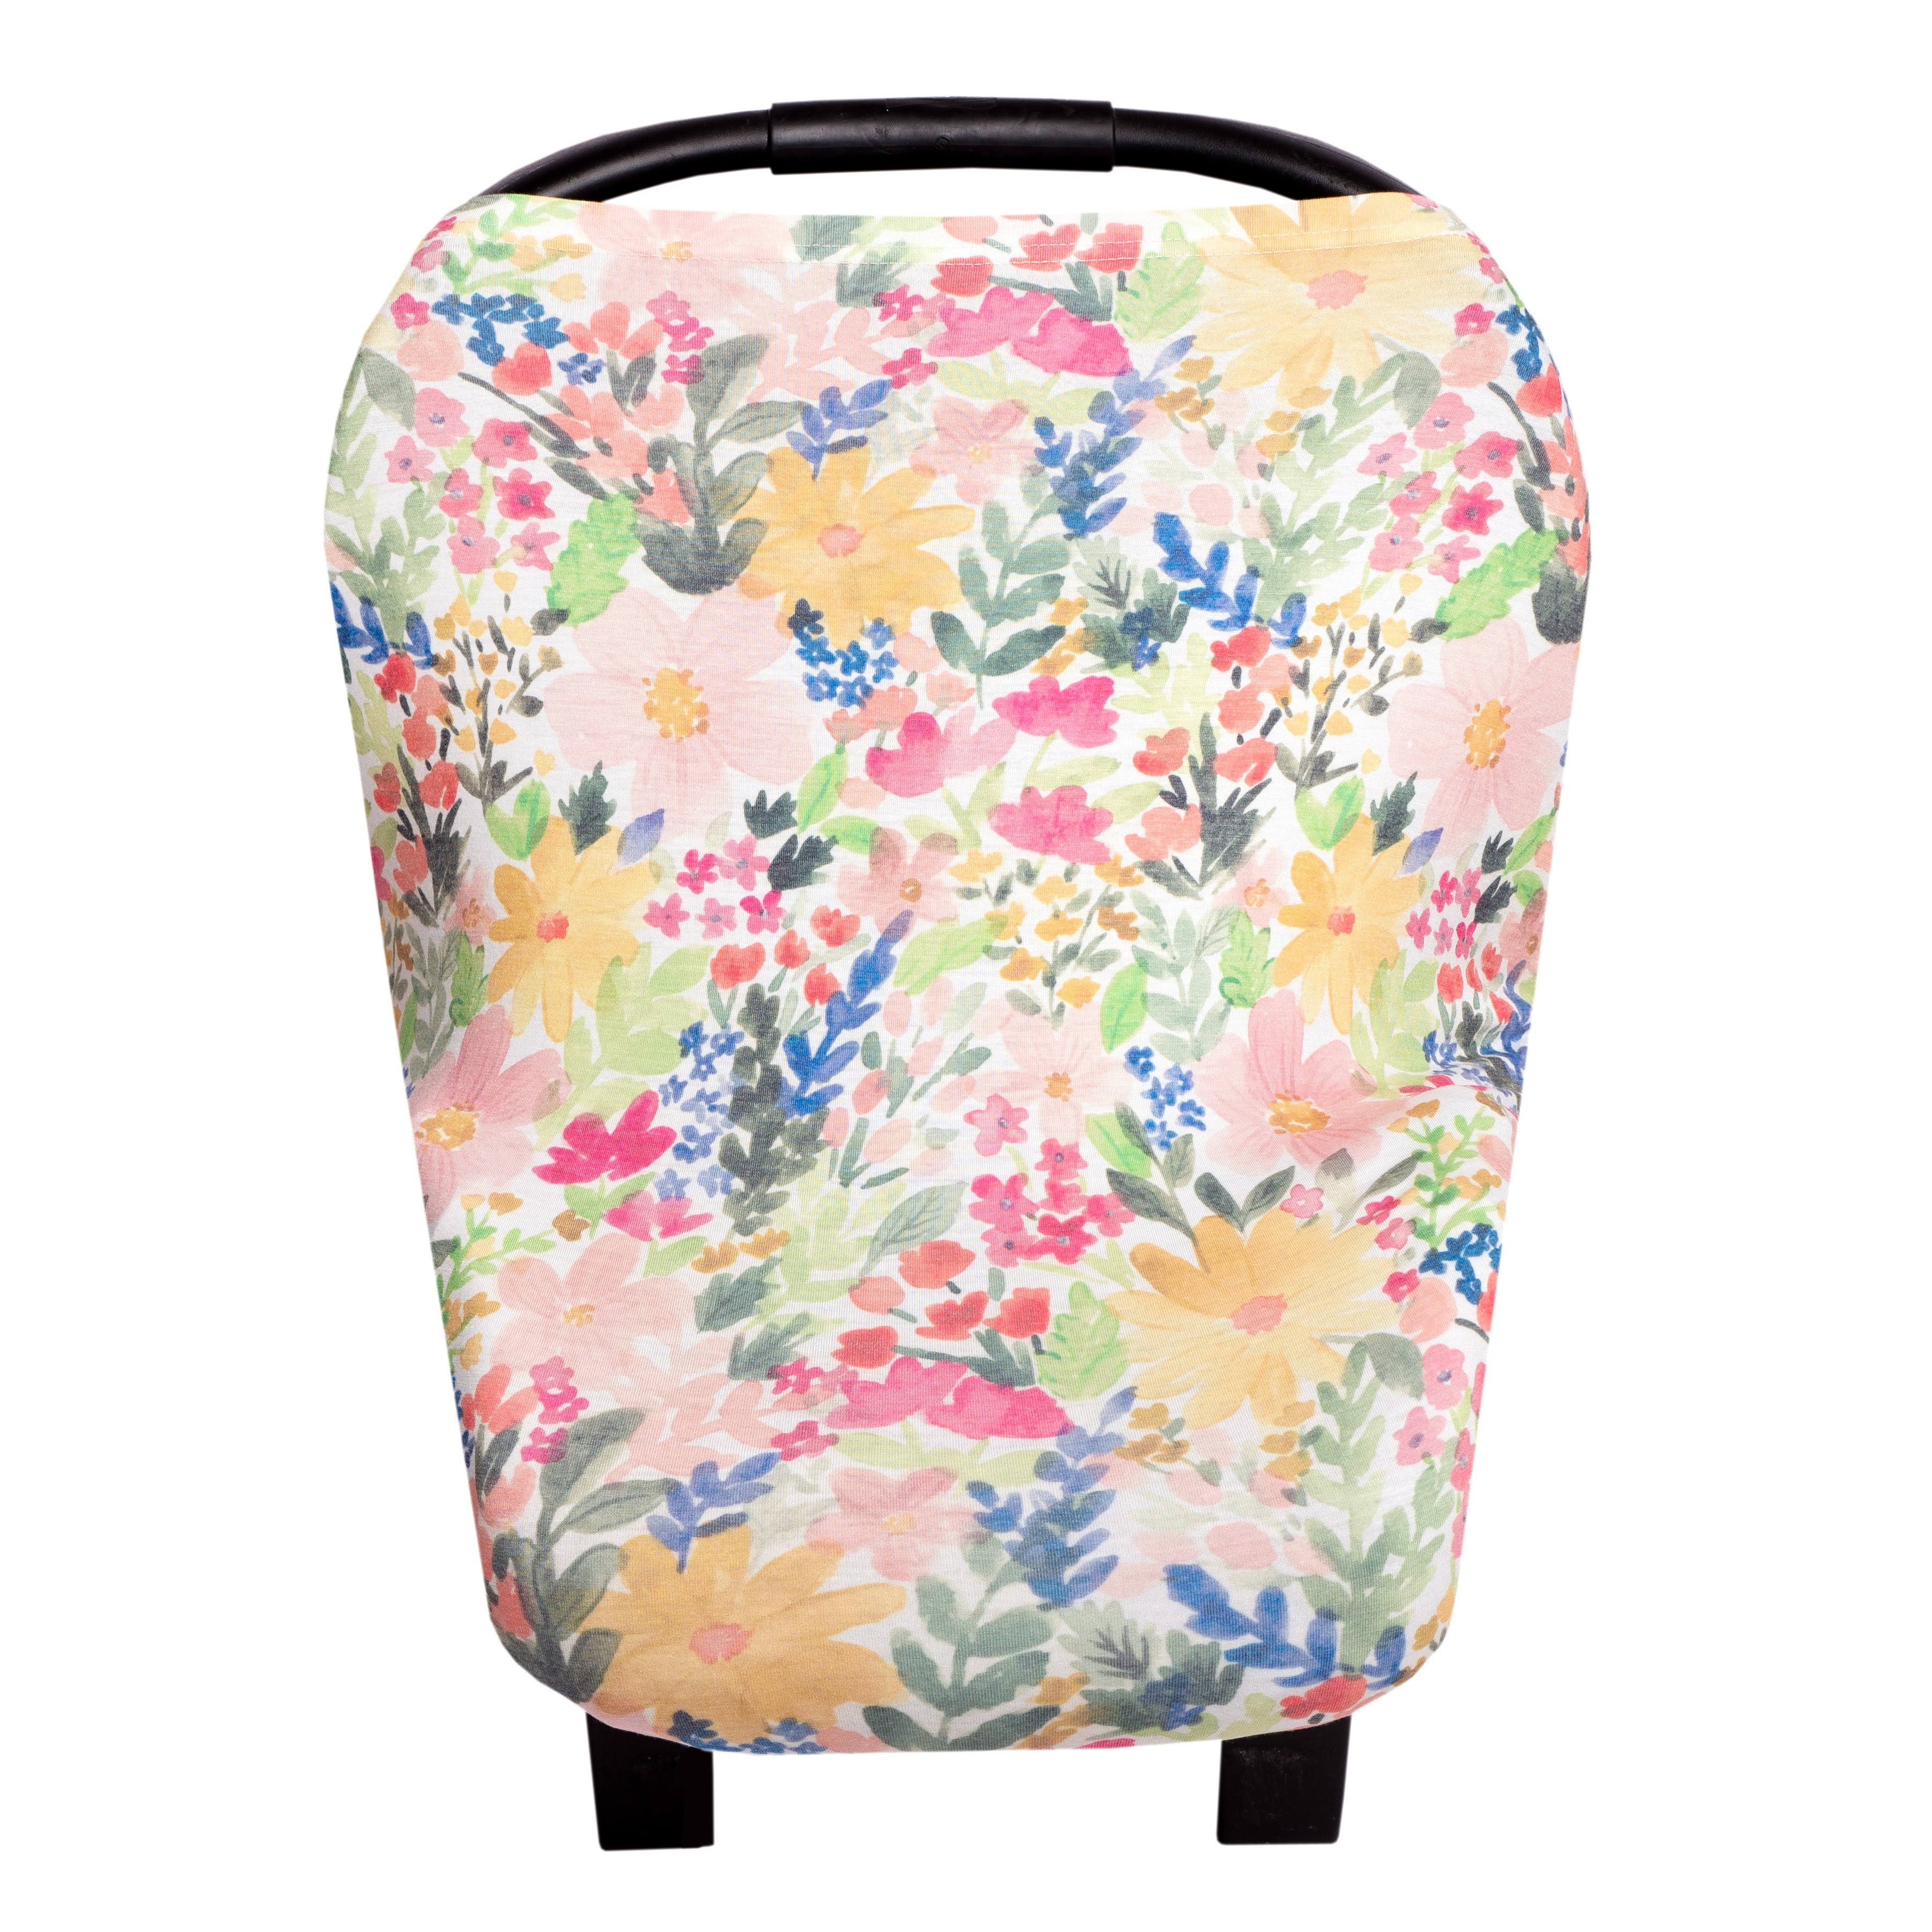 Copper Pearl Baby Car Seat Cover Canopy and Nursing Cover Multi-use Stretchy 5 in 1 GiftLark